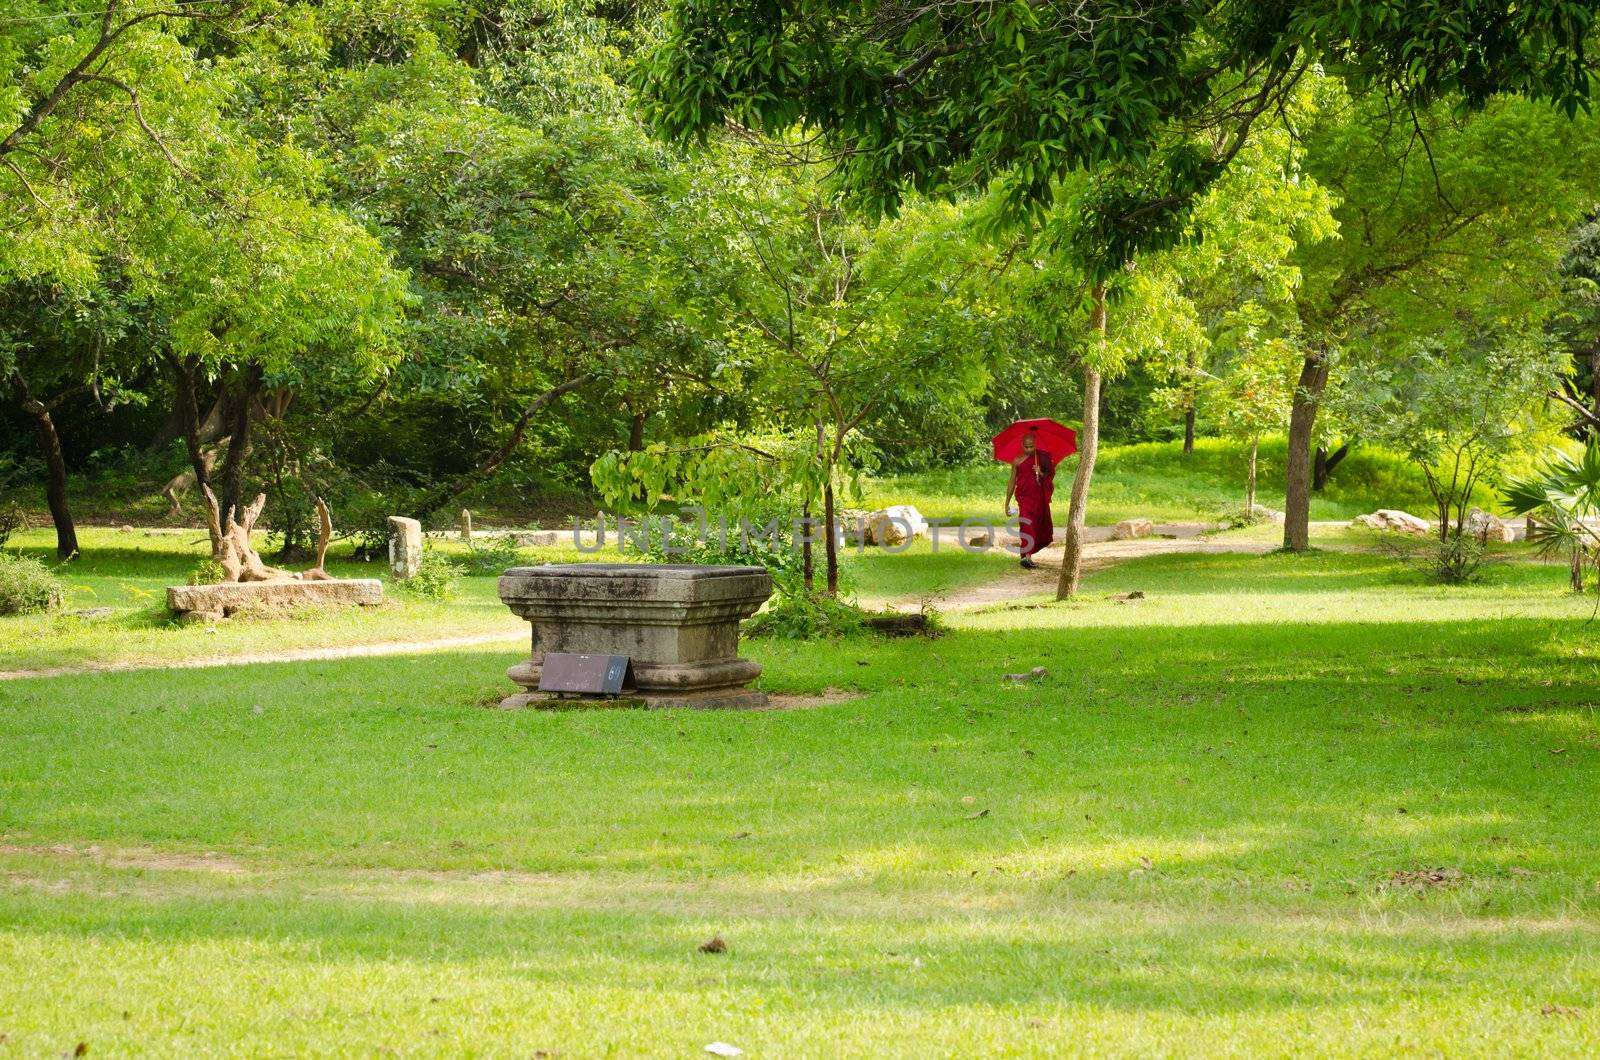 Anuradhapura, Sri Lanka - December 5, 2011:  Buddhism monk with red clothes and umbrella follow path in ruined old temple